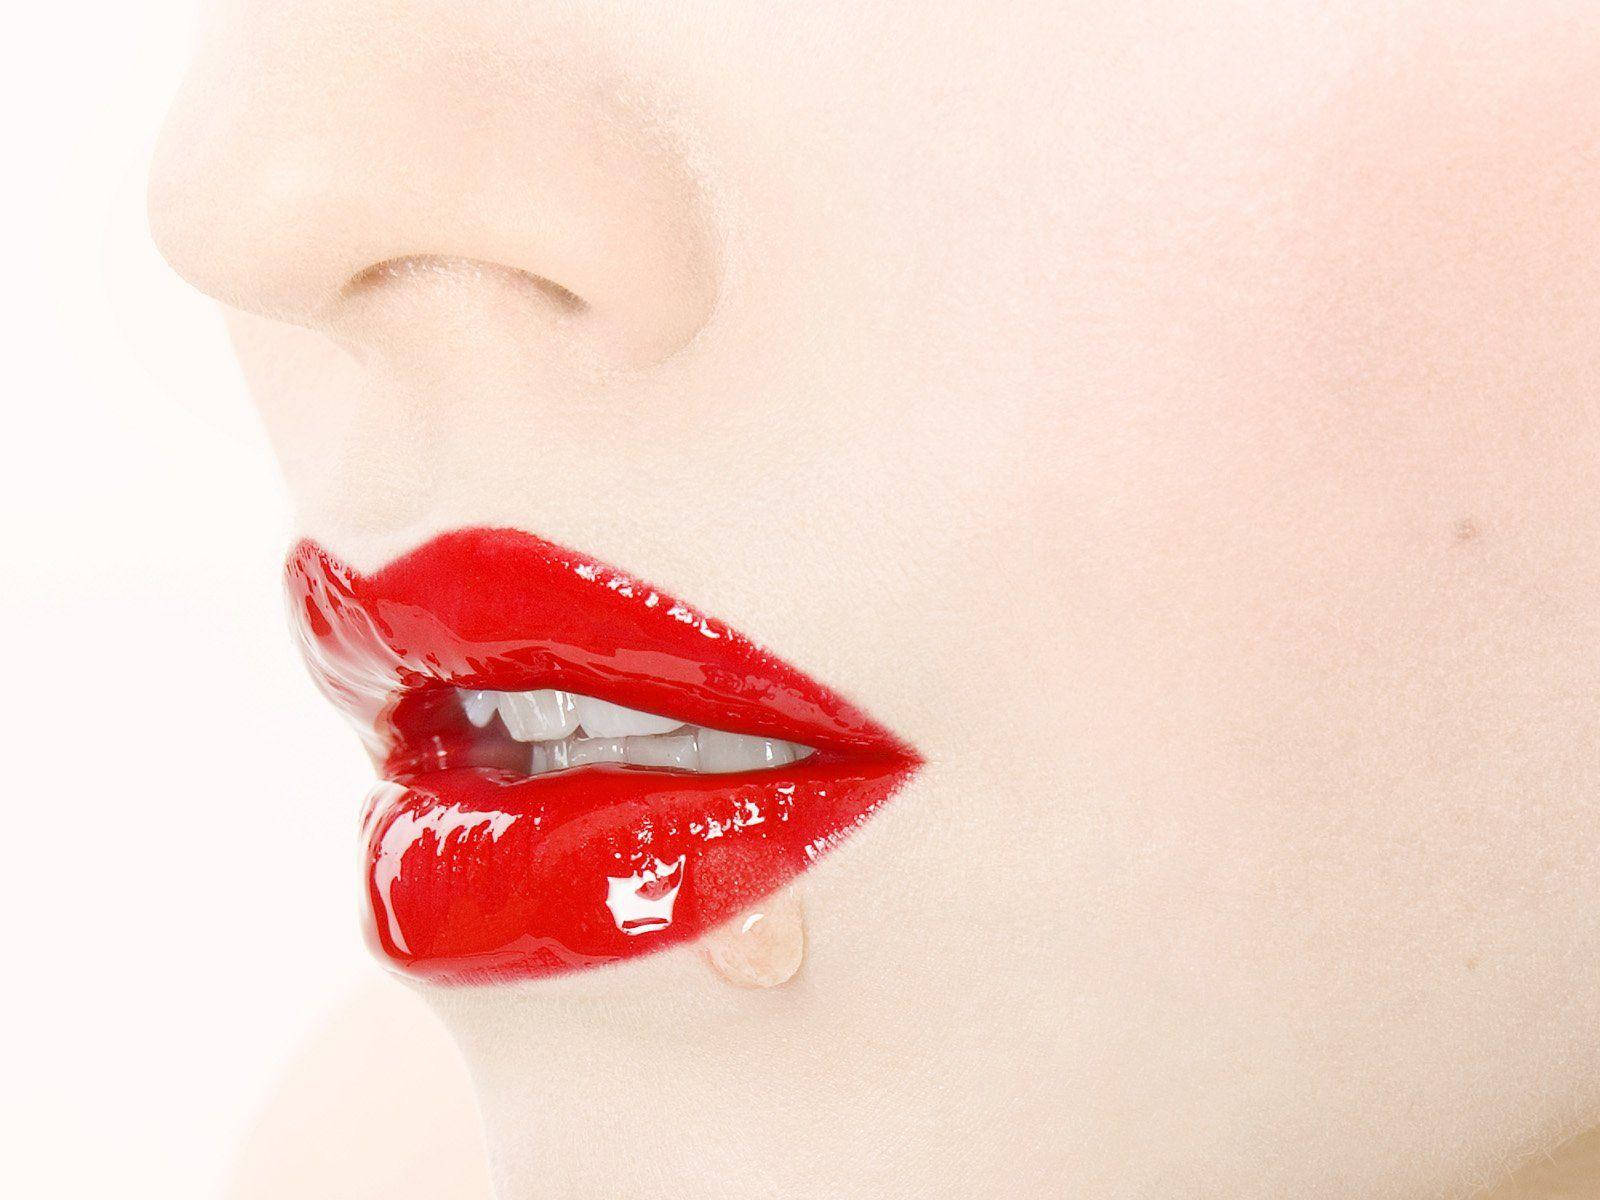 White Woman's Face With Red Watery Lips Wallpaper